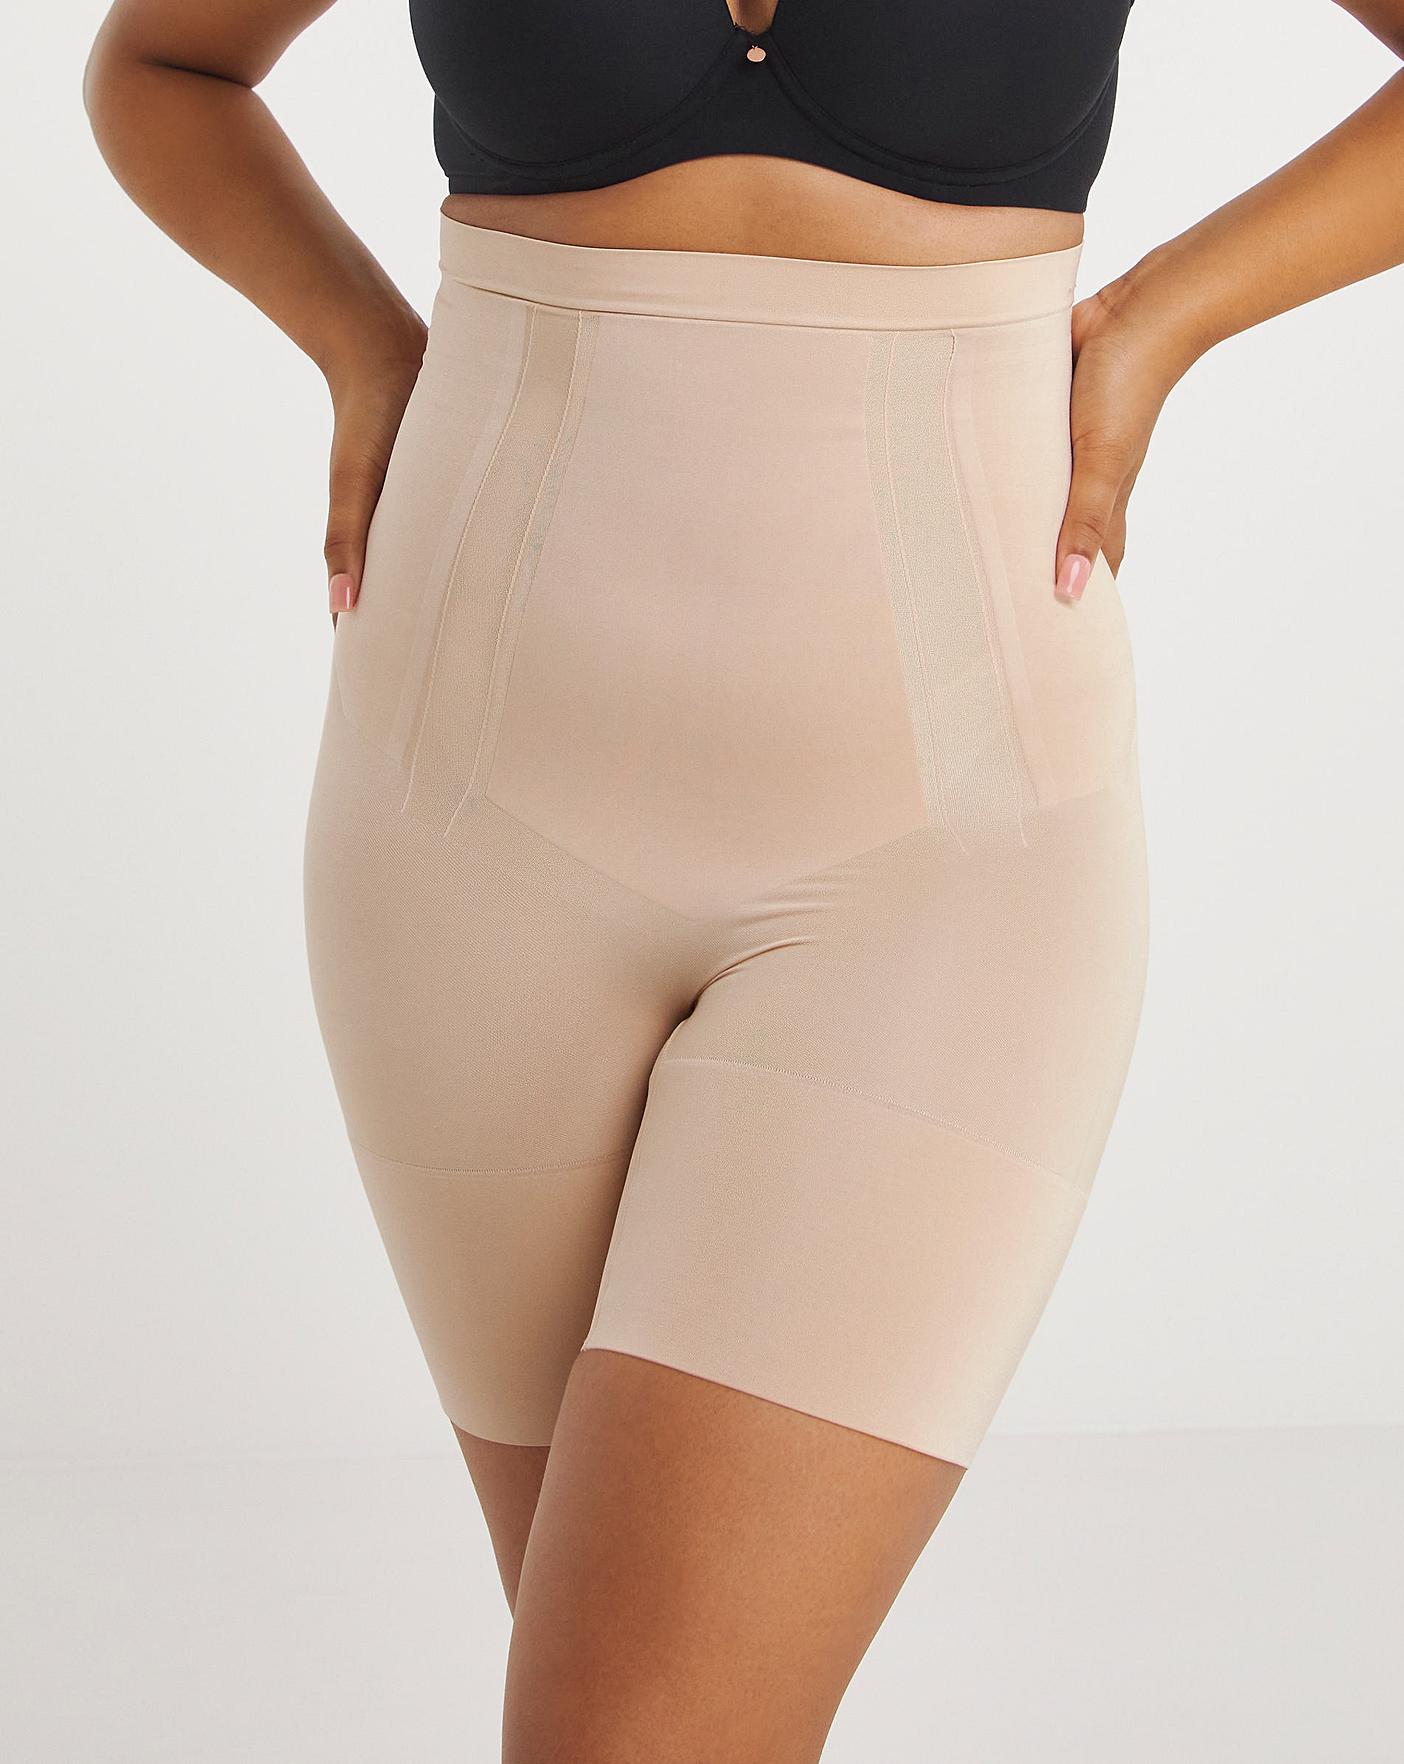 SPANX Higher Power Shorts - High-Rise Waist with Double Gusset Design  Functional